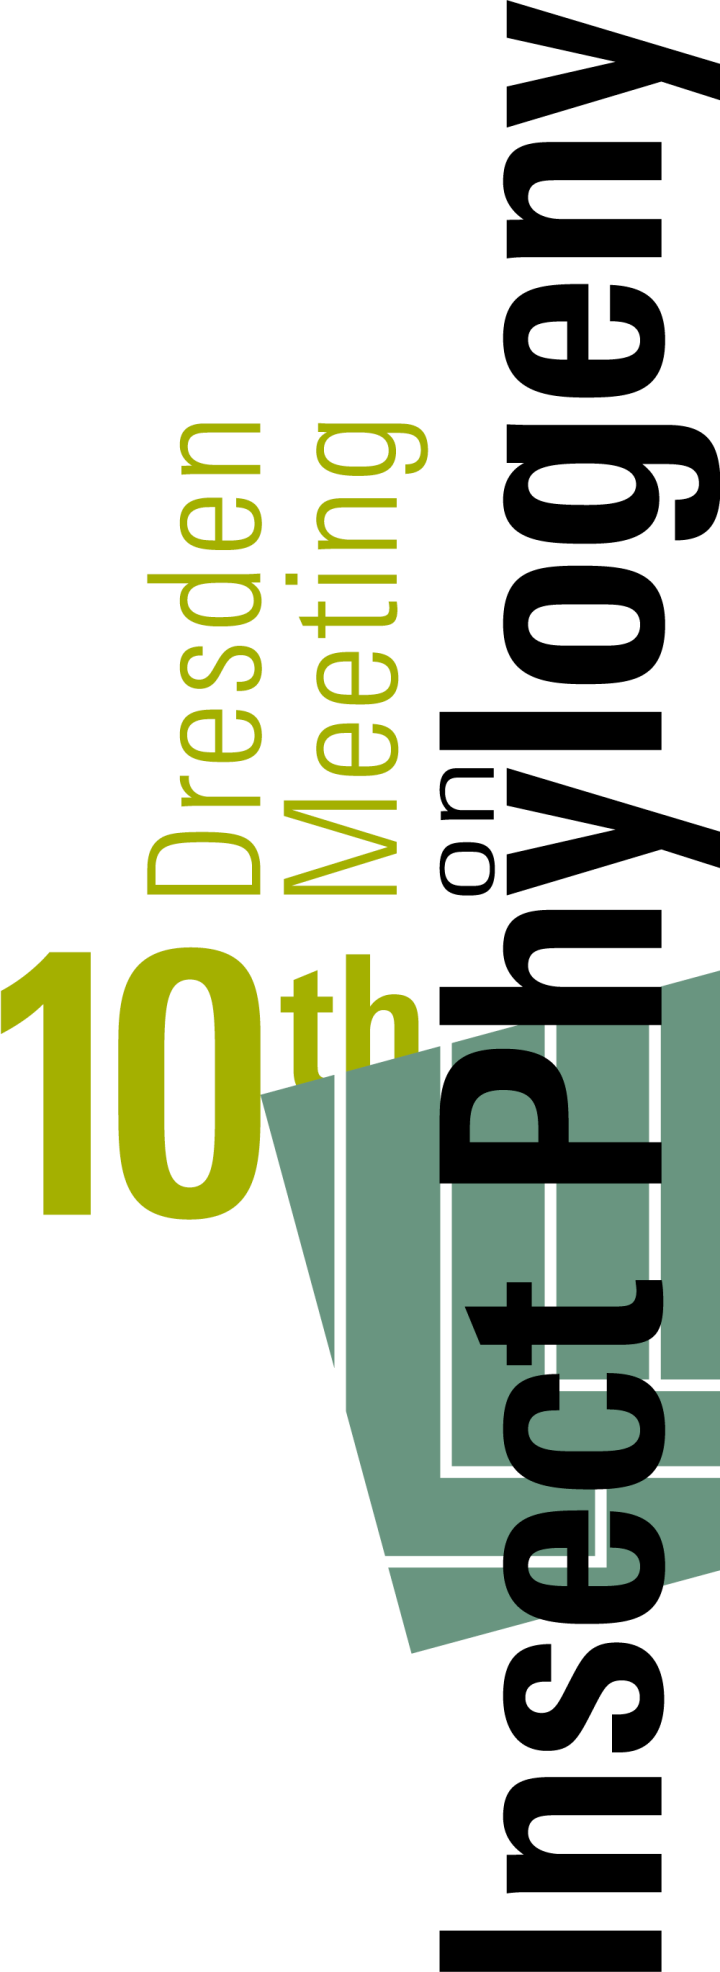 10th Dresden Meeting Insect Phylogeny Logo